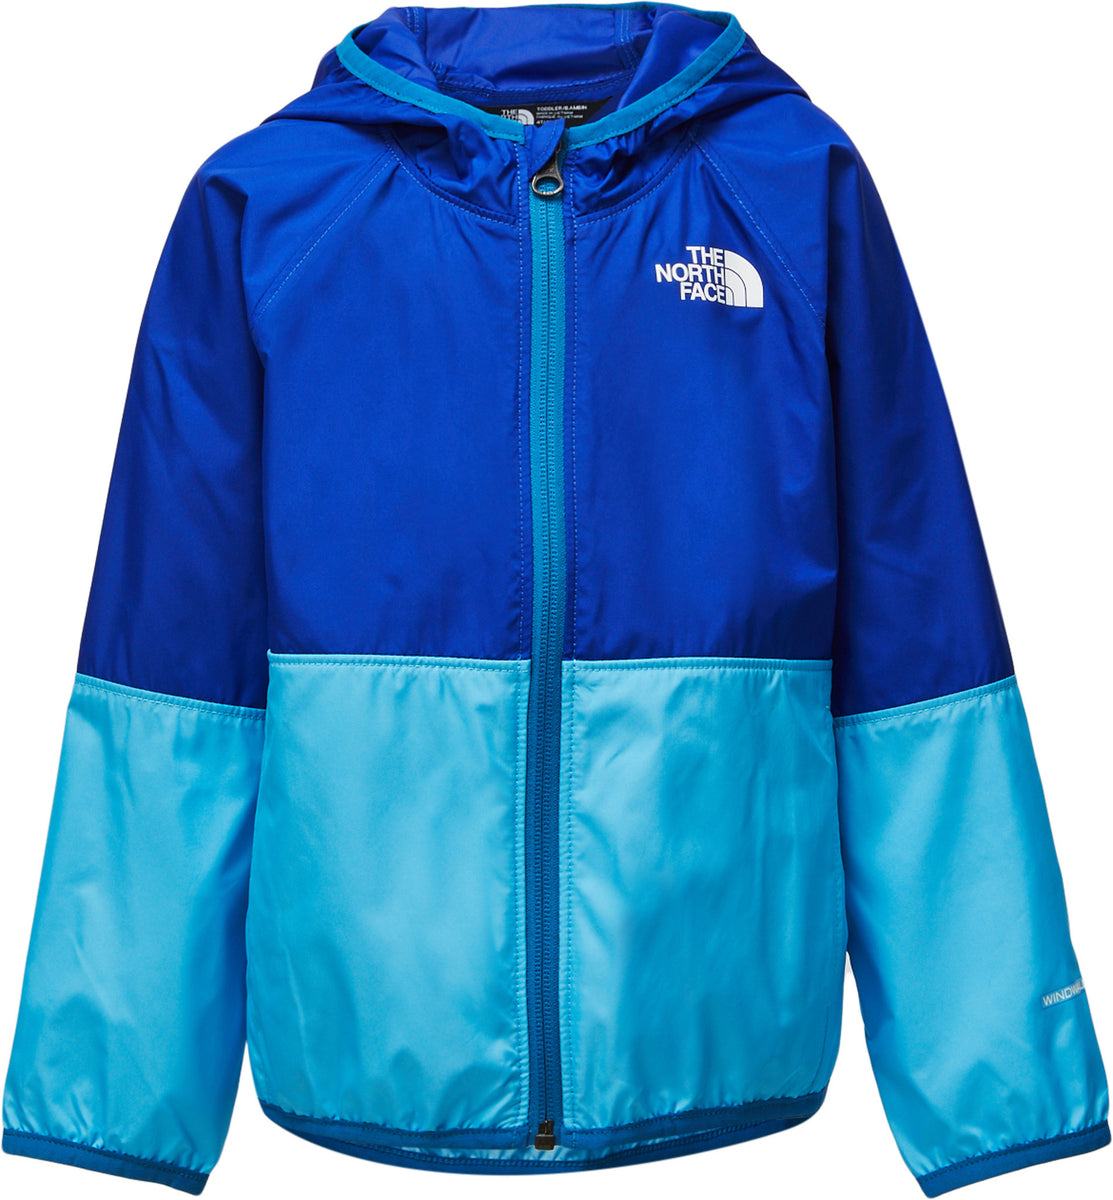 The North Face Windwall Jacket - Youth